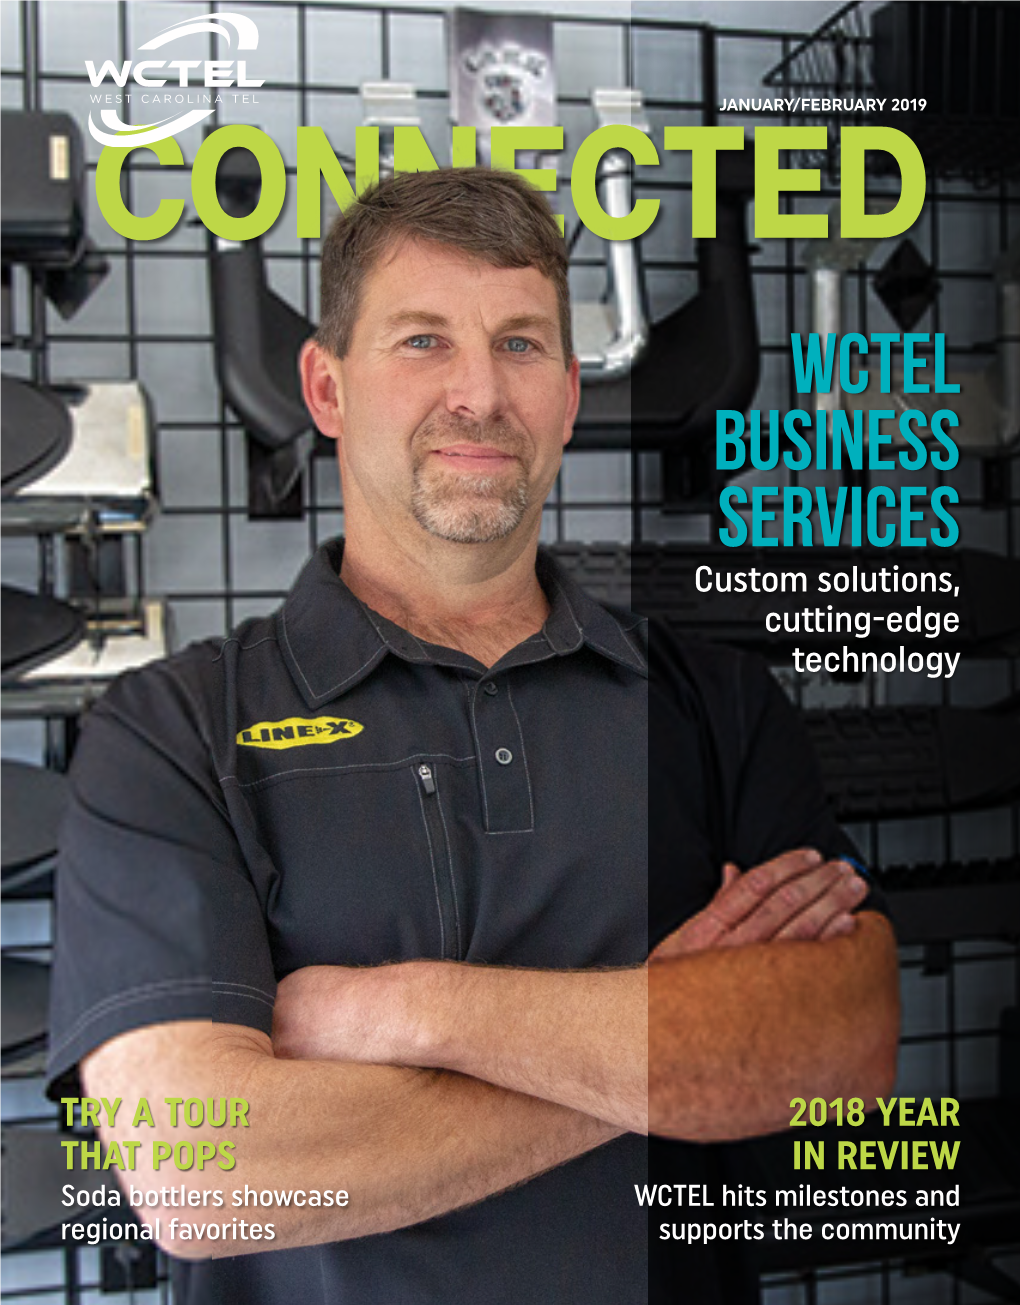 WCTEL BUSINESS SERVICES Custom Solutions, Cutting-Edge Technology